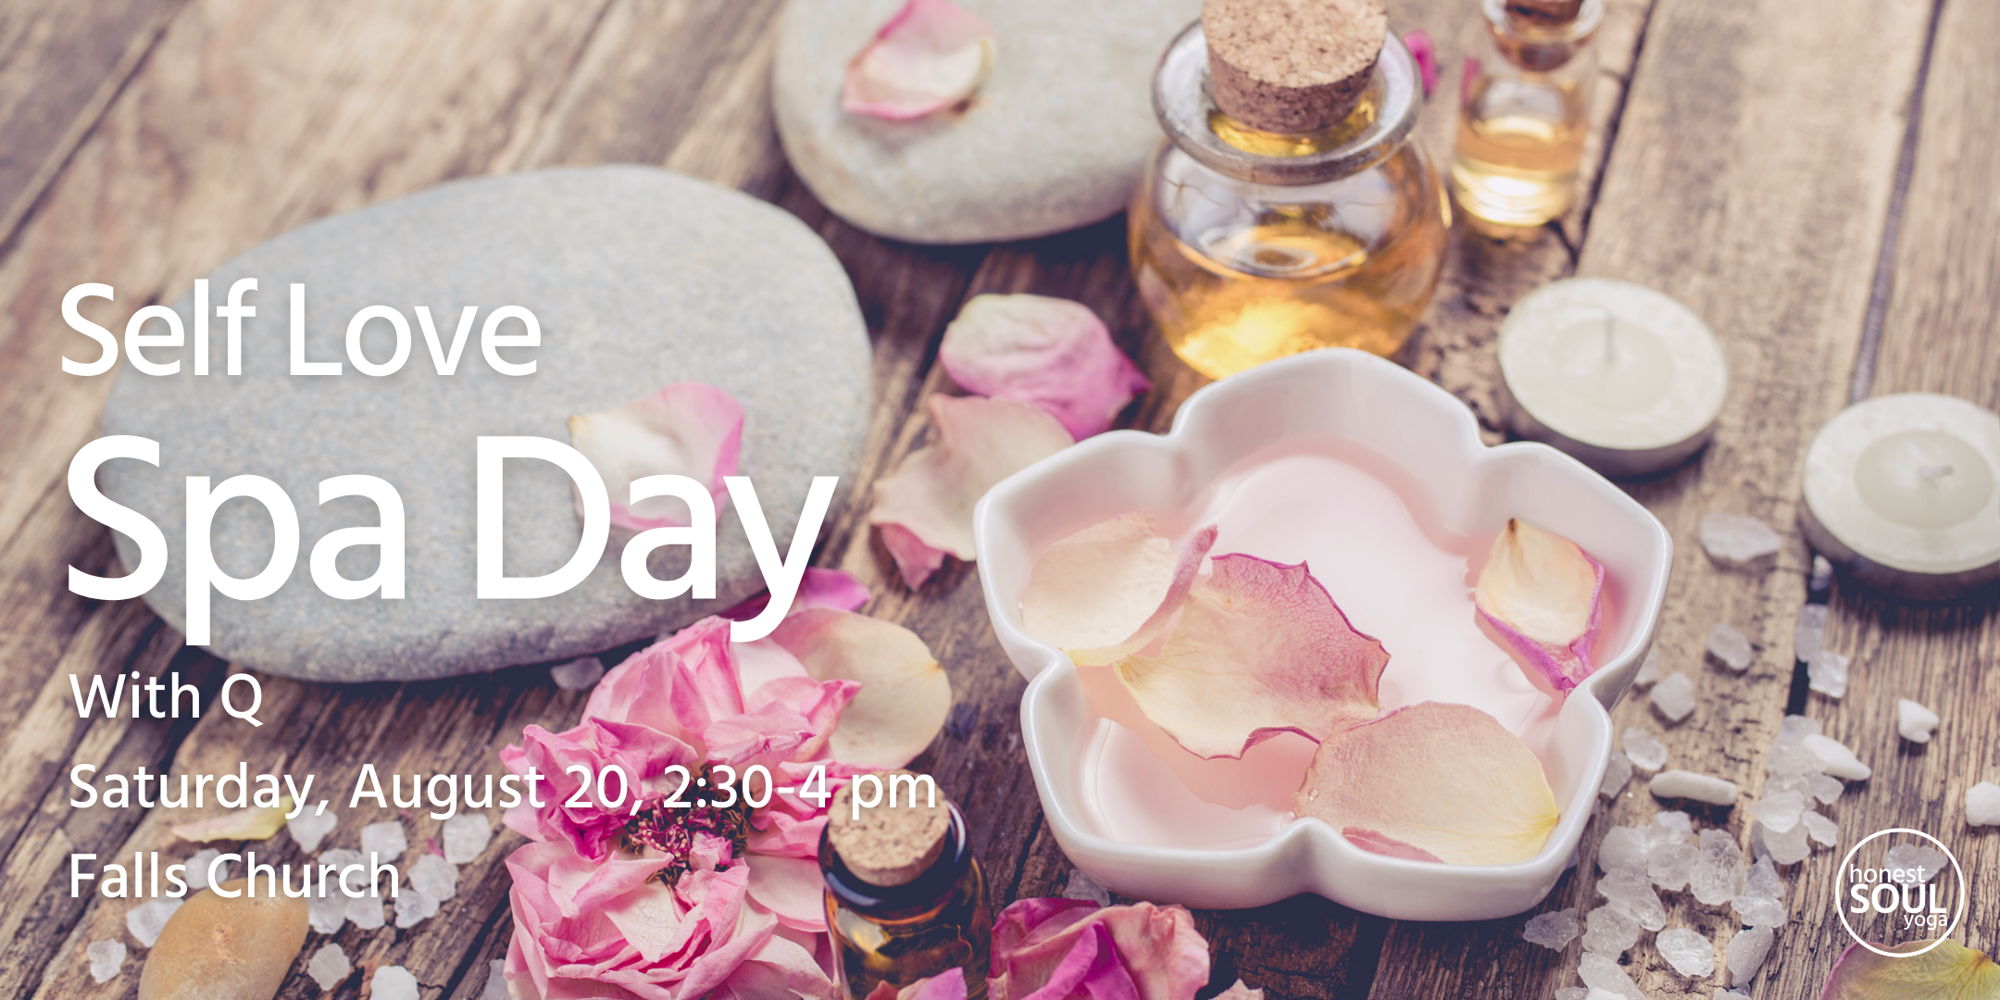 Spa Day of Self-Love Experience promotional image